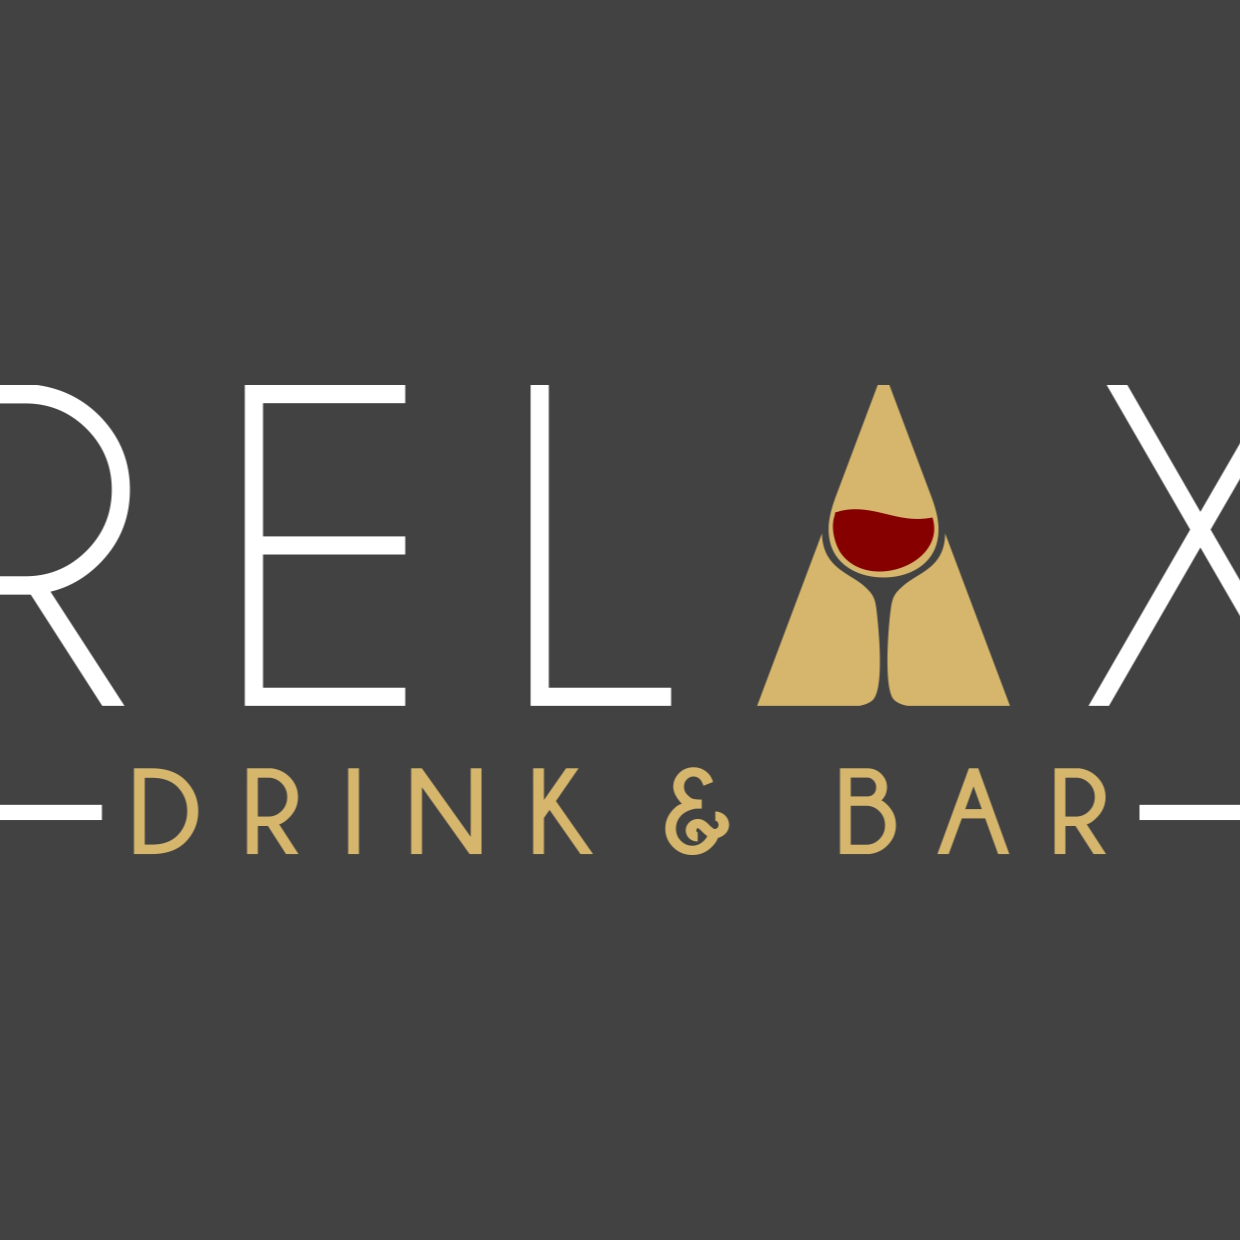 Relax drink-bar station